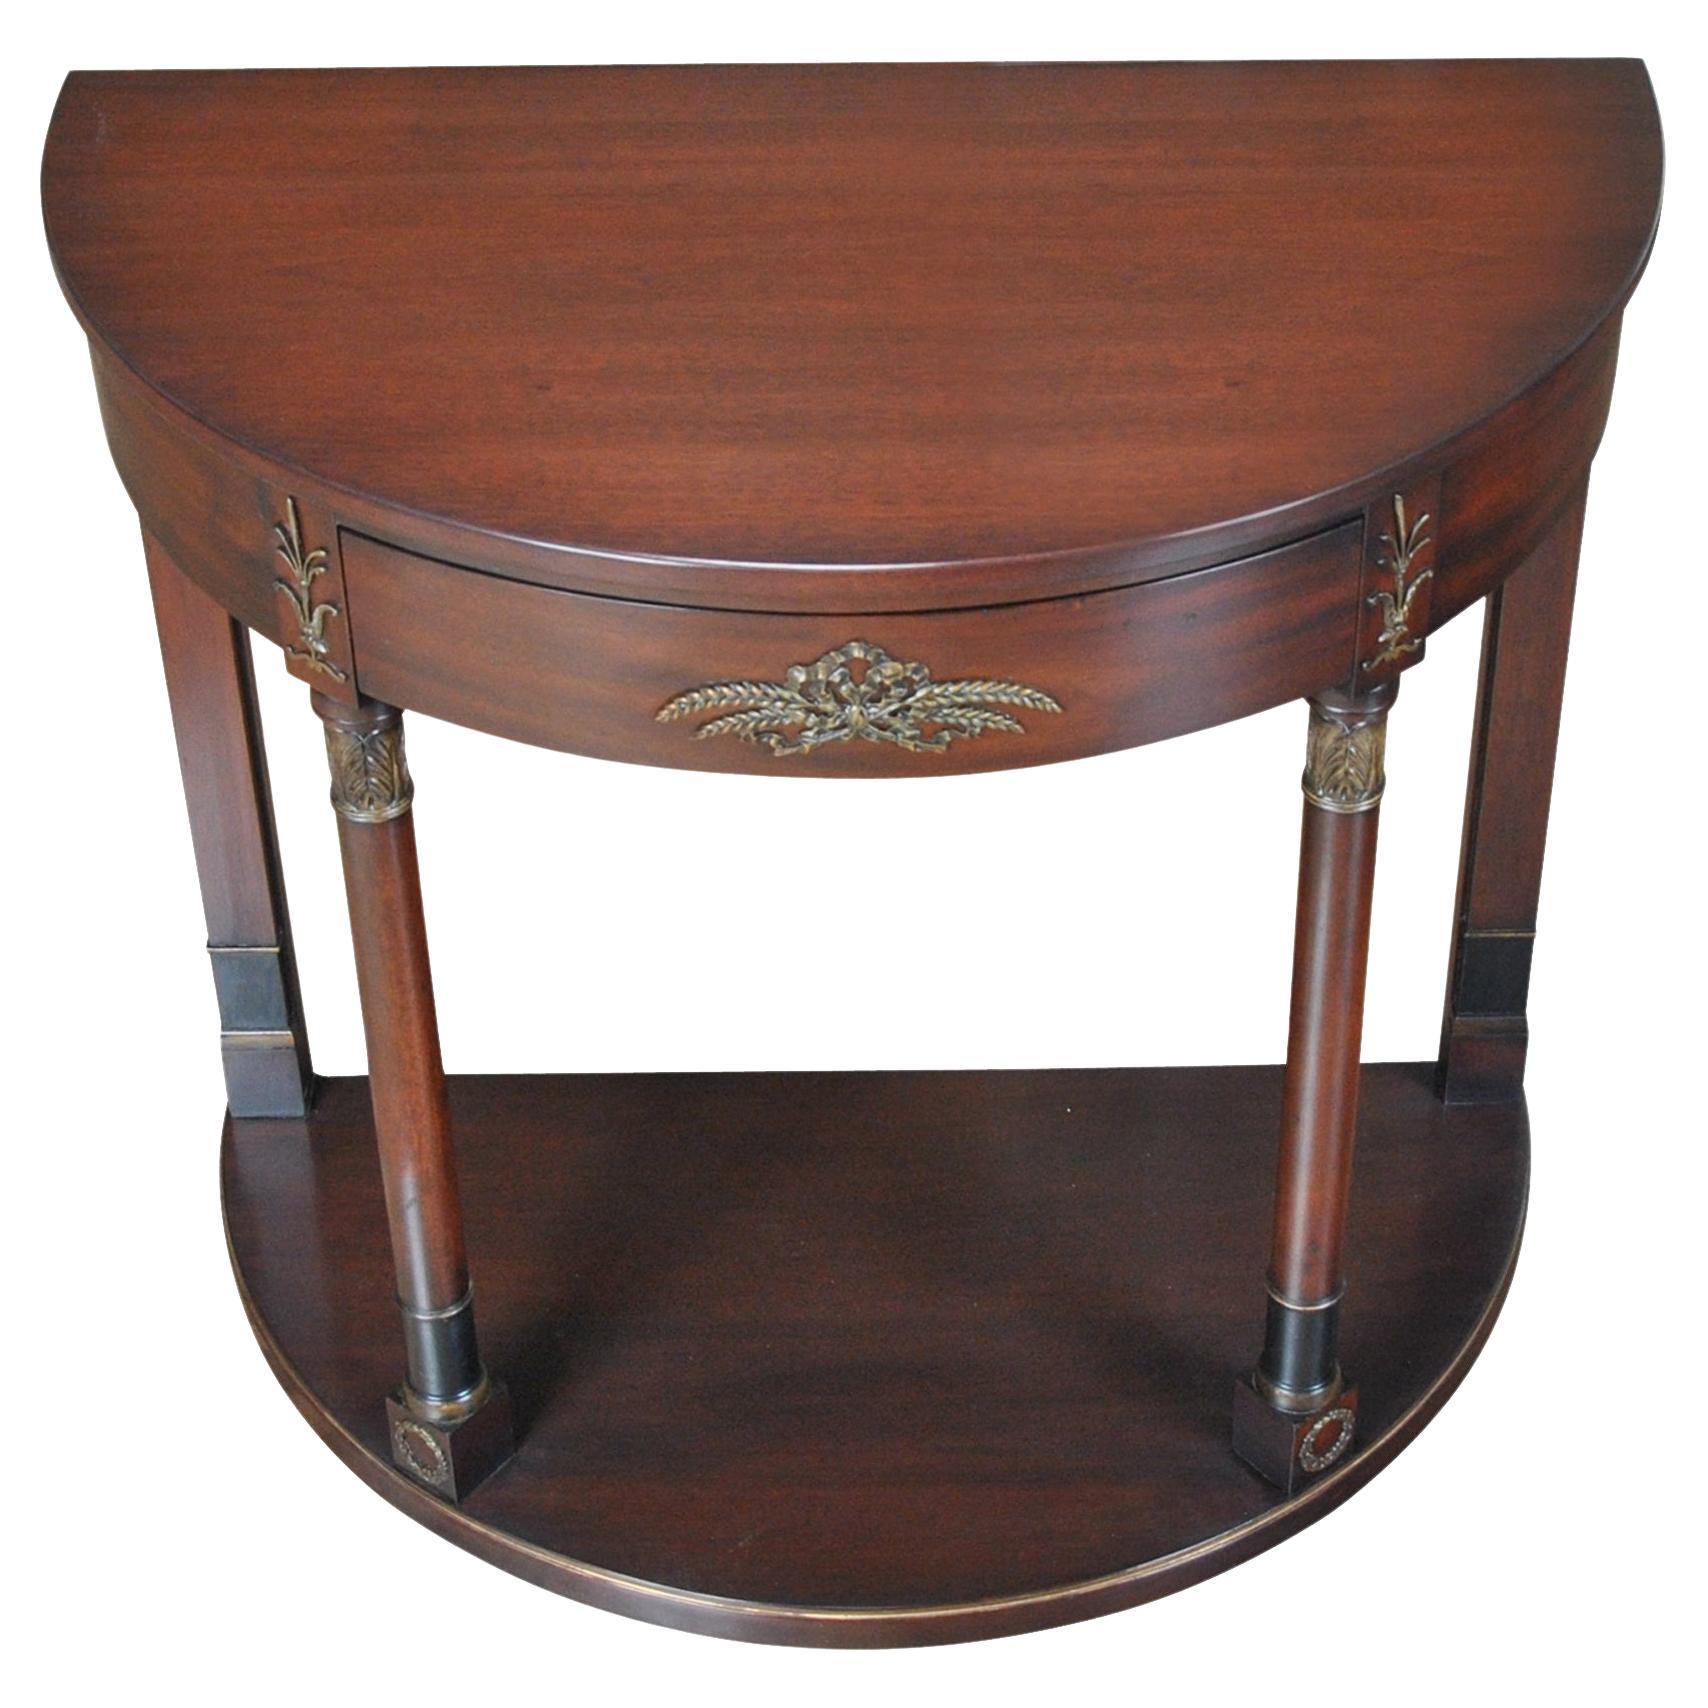 Kittinger Mahogany Console with Columns A903